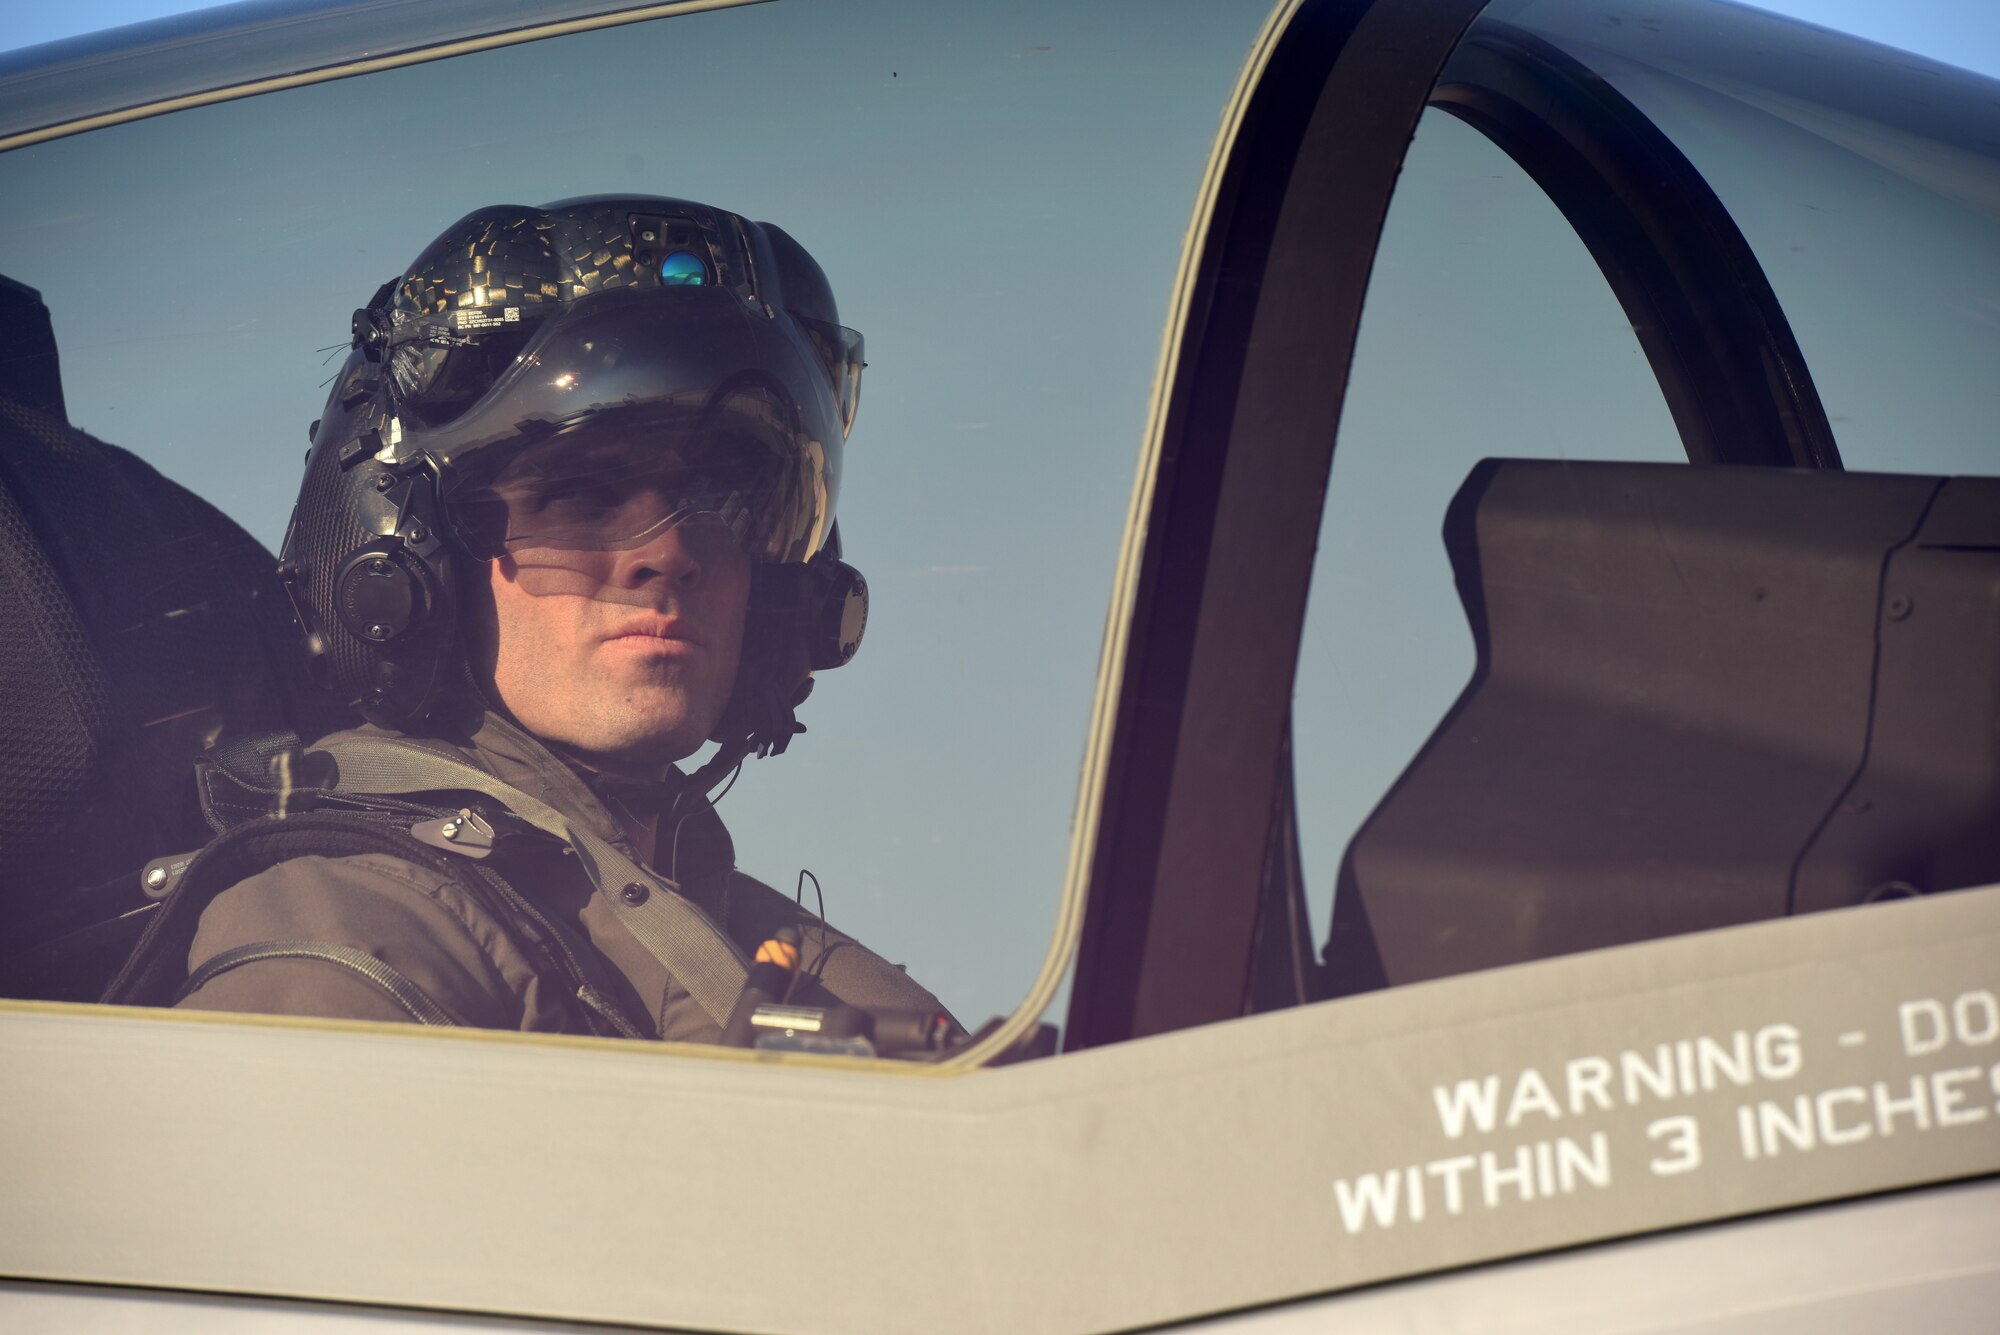 An F-35A Lightning II pilot looks out his canopy during Astral Knight 2019 on June 3, 2019, at Aviano Air Base, Italy. The F-35A is designed to provide the pilot with unsurpassed situational awareness, positive target identification and precision strike in all weather conditions. (U.S. Air Force photo by Tech. Sgt. Jim Araos)